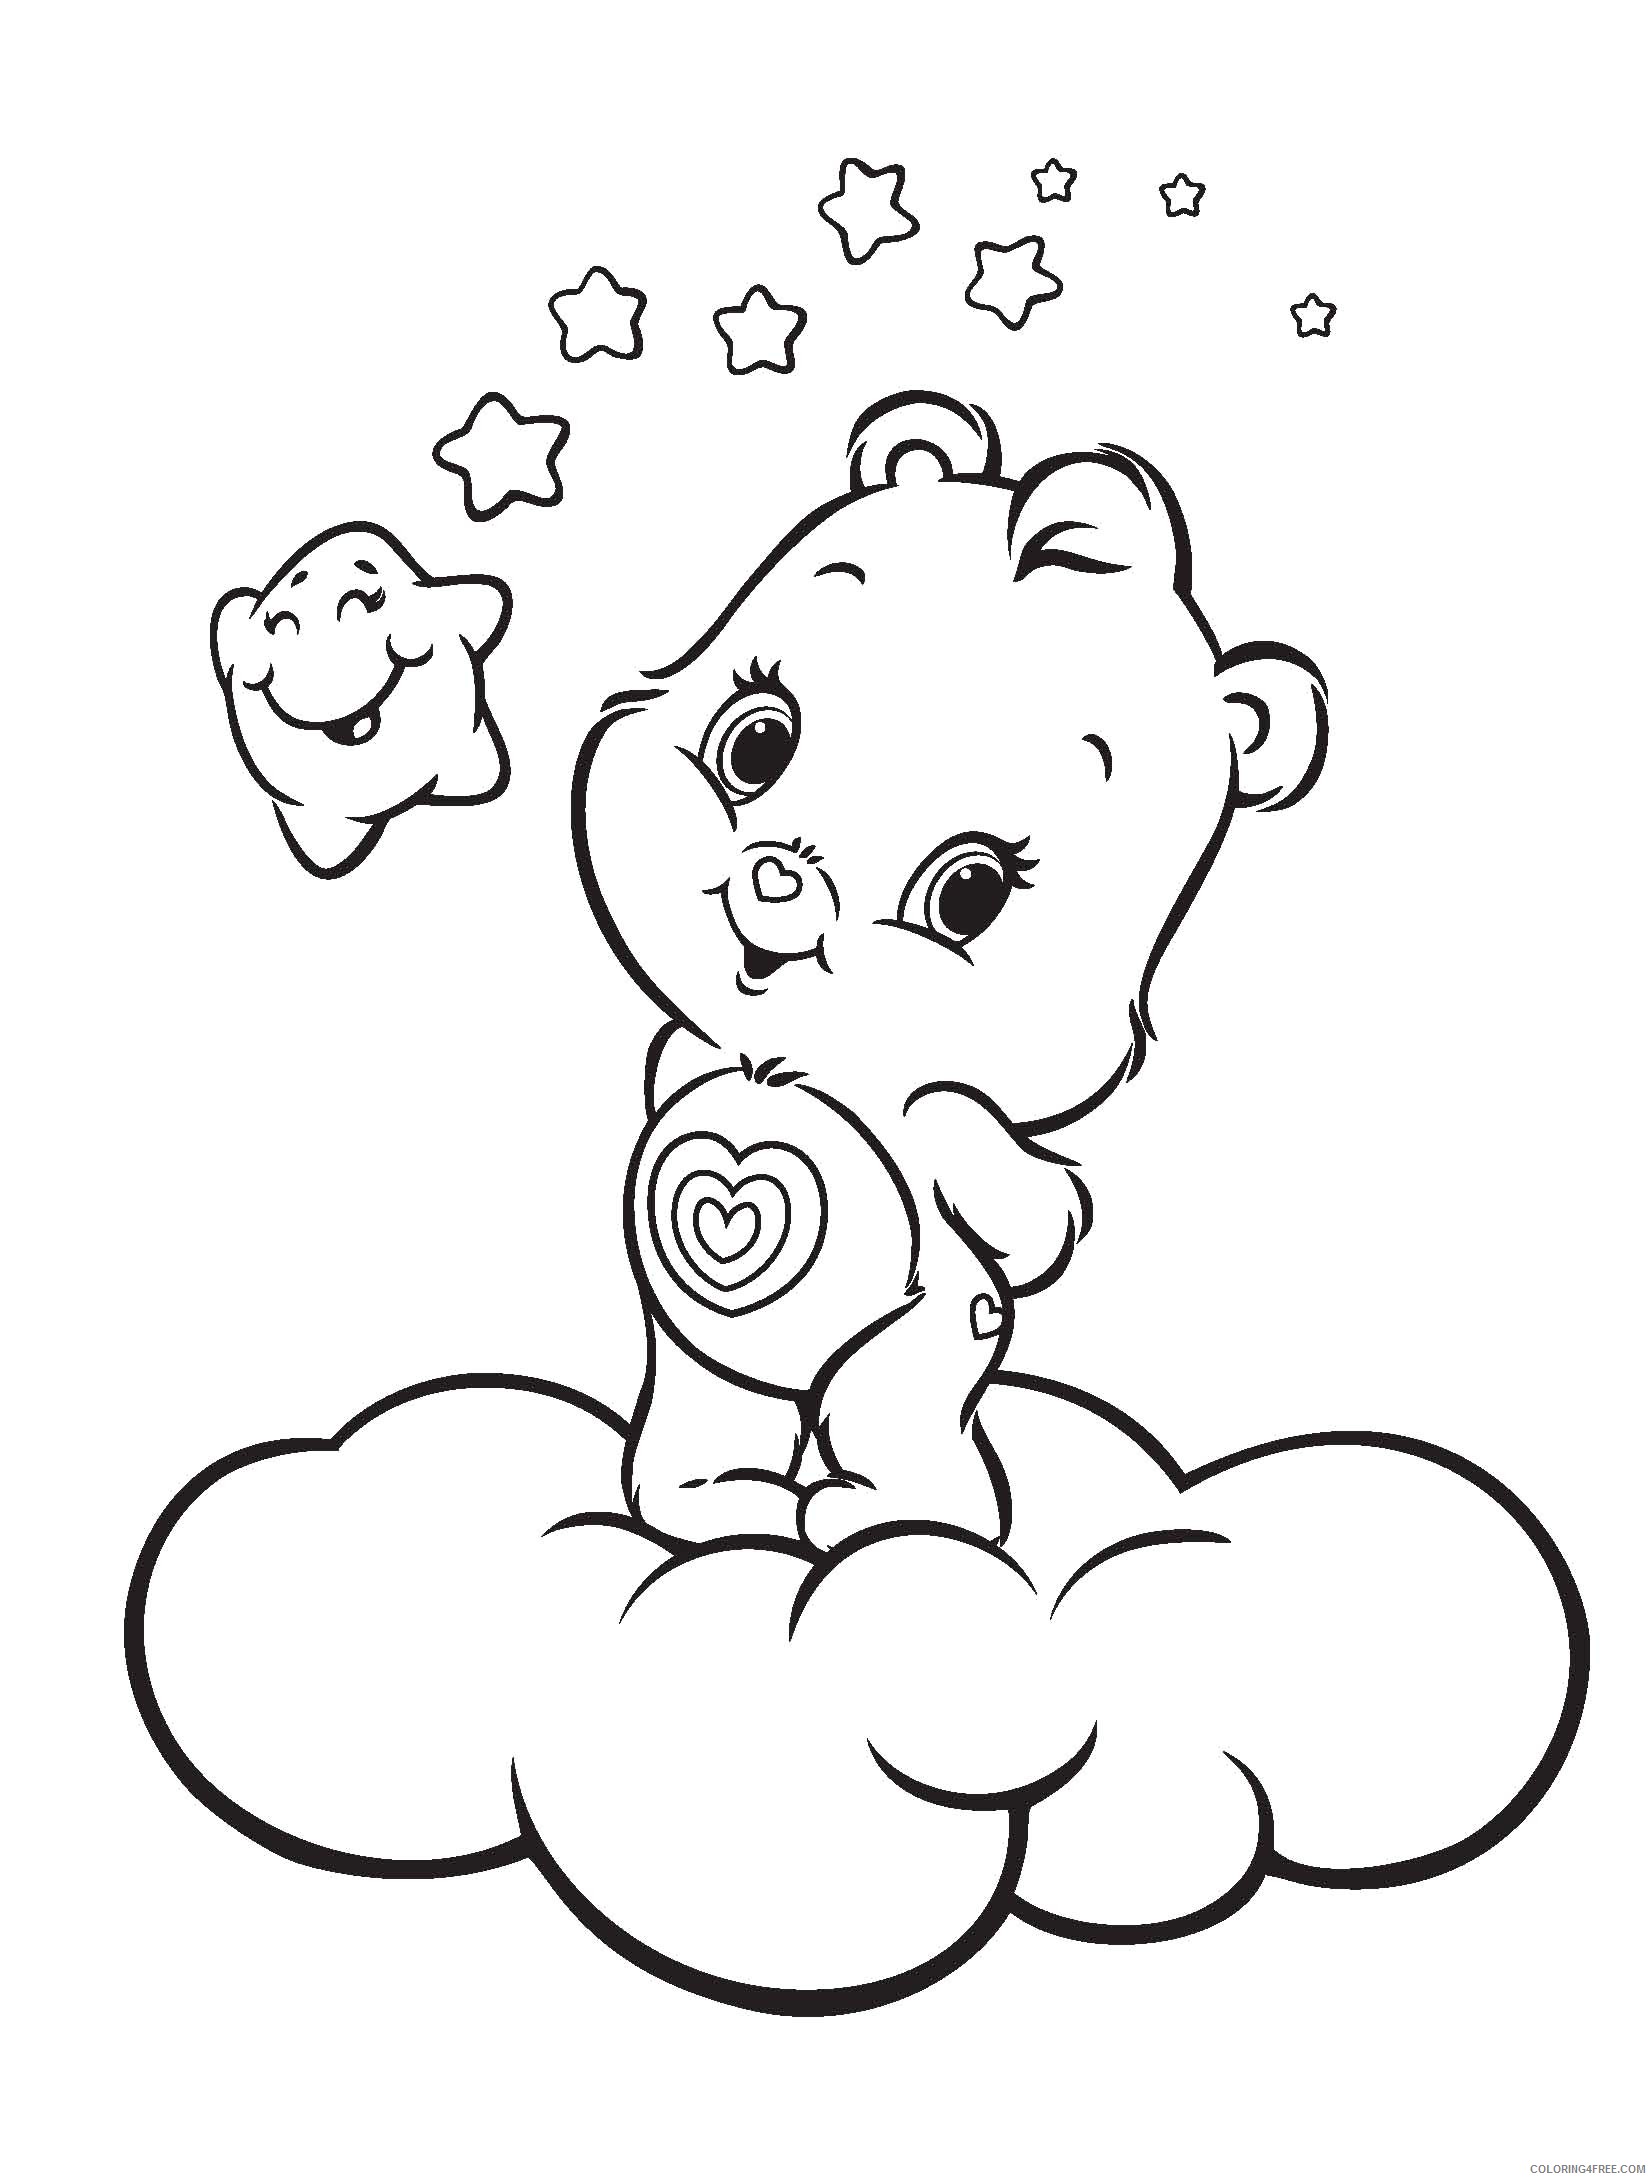 Care Bears Coloring Pages Cartoons Baby Care Bears Printable 2020 1544 Coloring4free